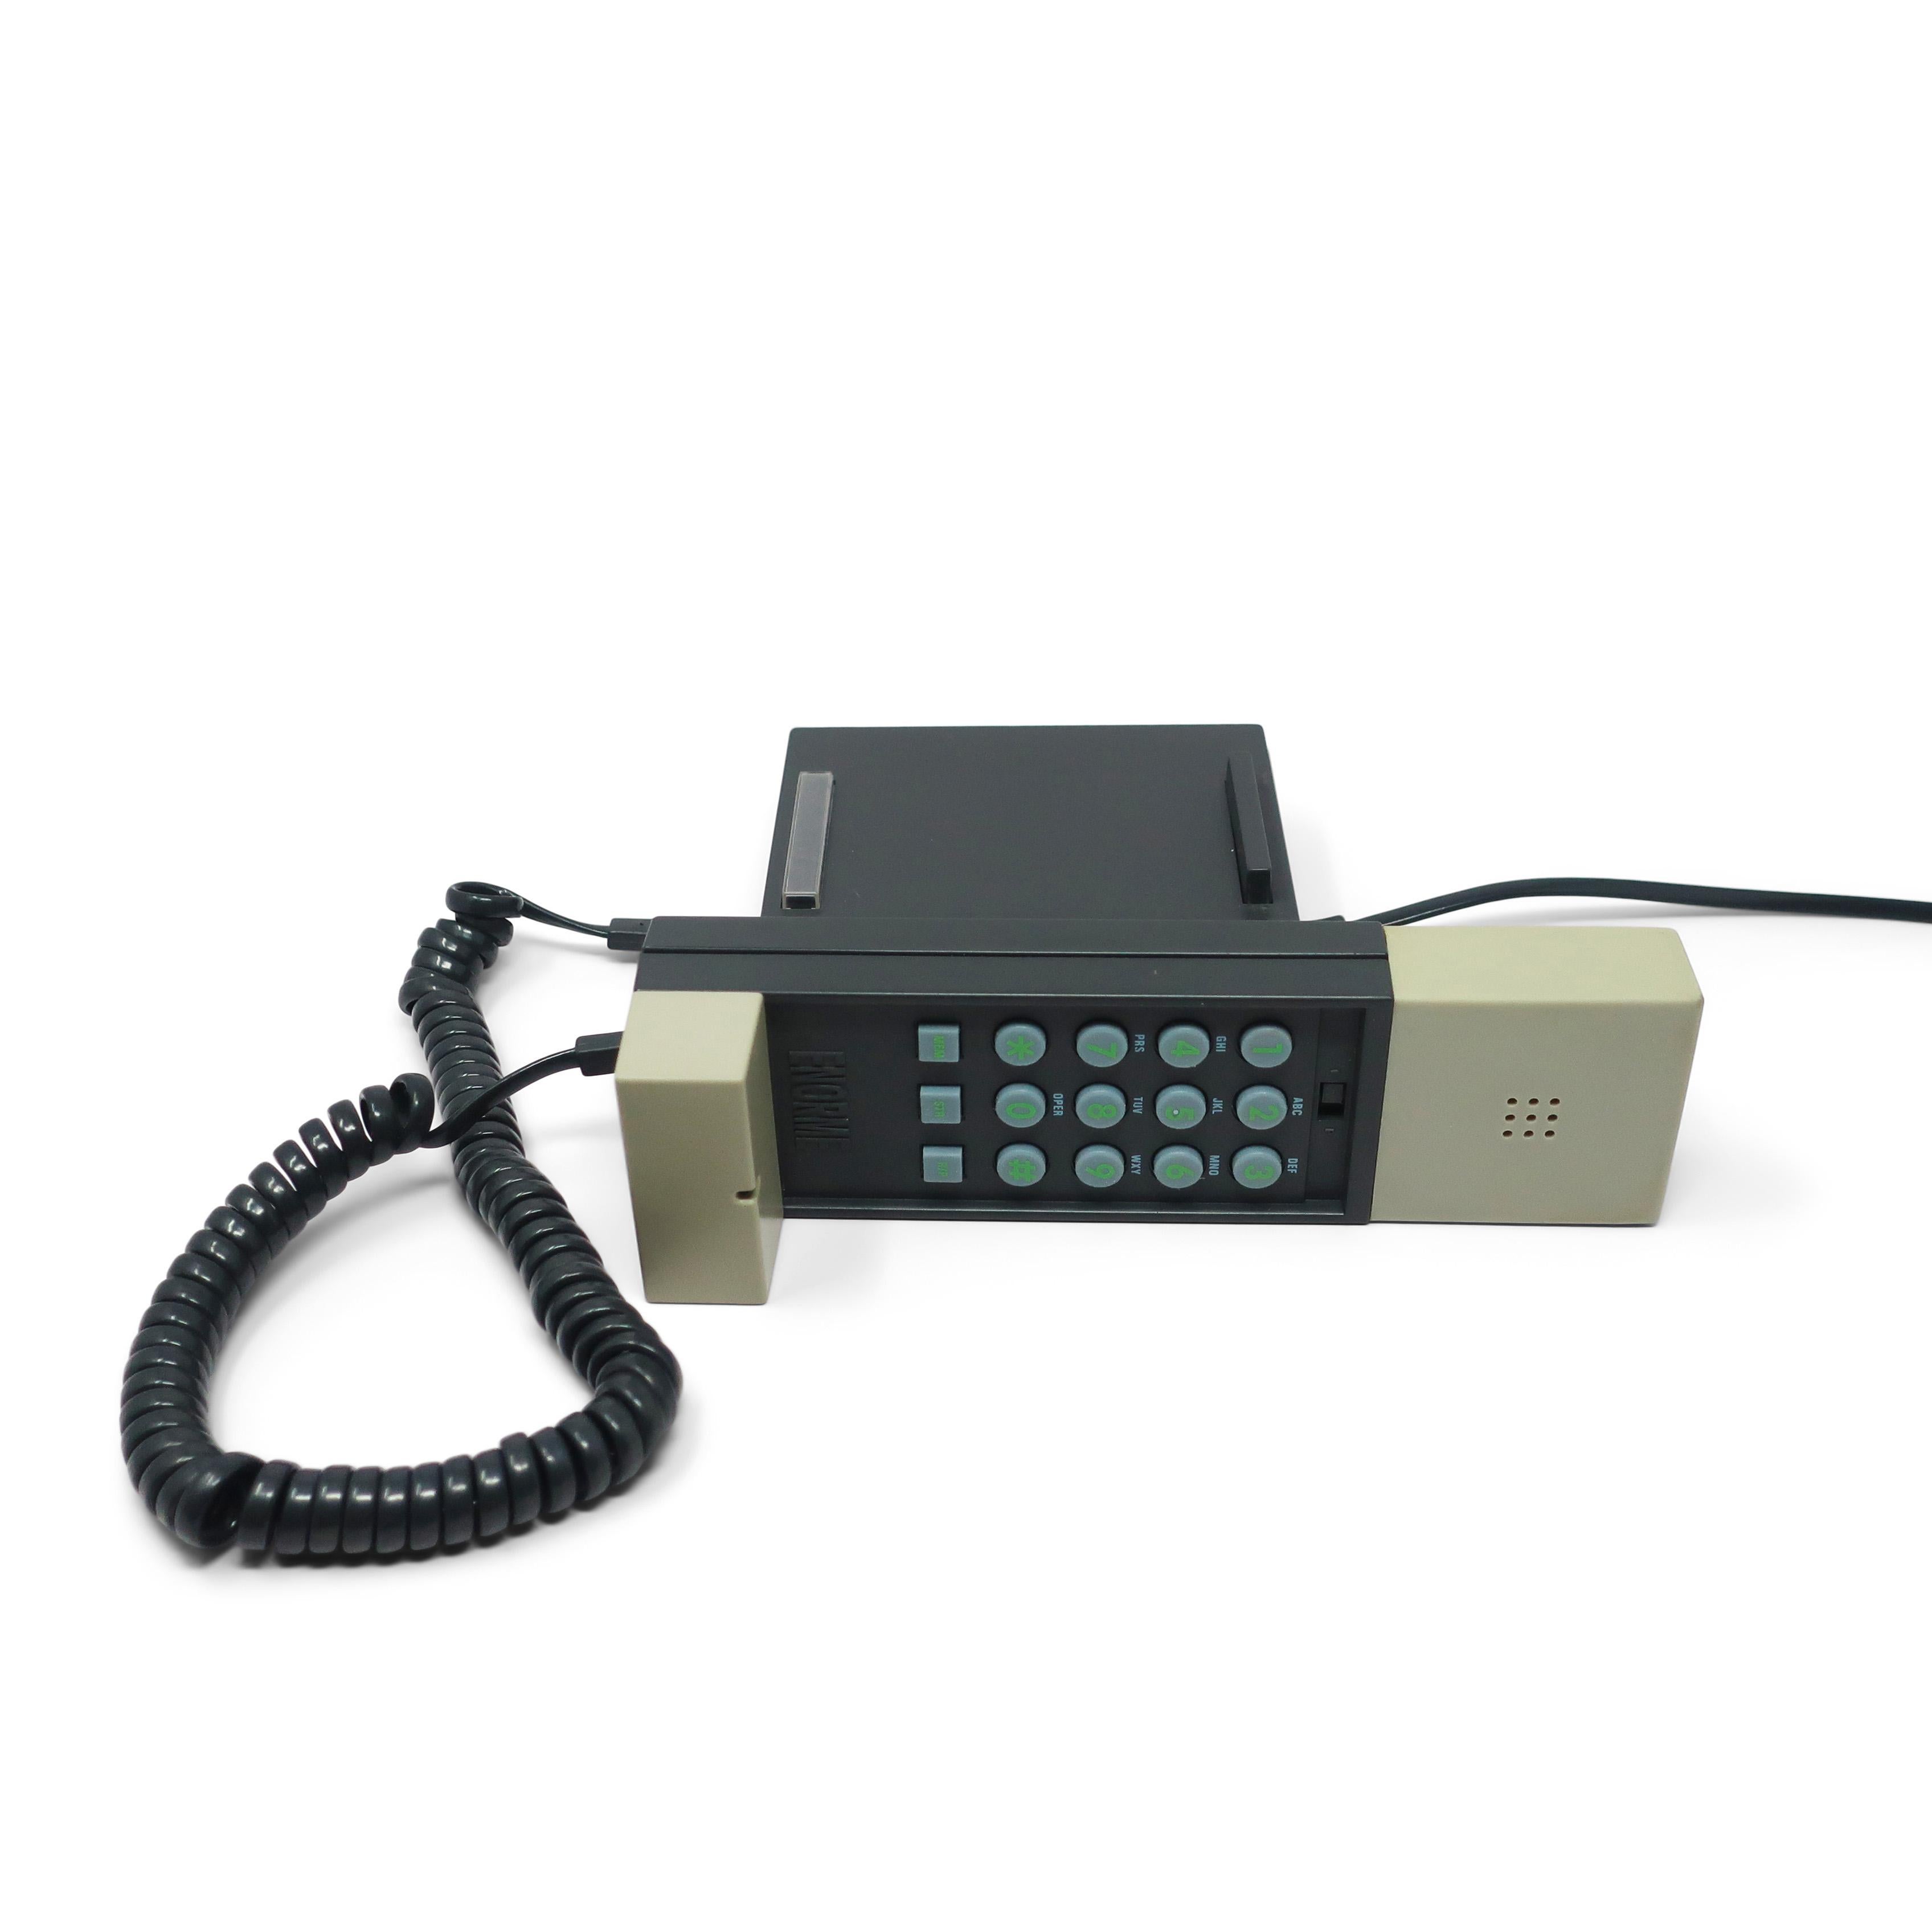 20th Century 1986 Gray and Black Enorme Telephone by Ettore Sottsass for Enorme For Sale